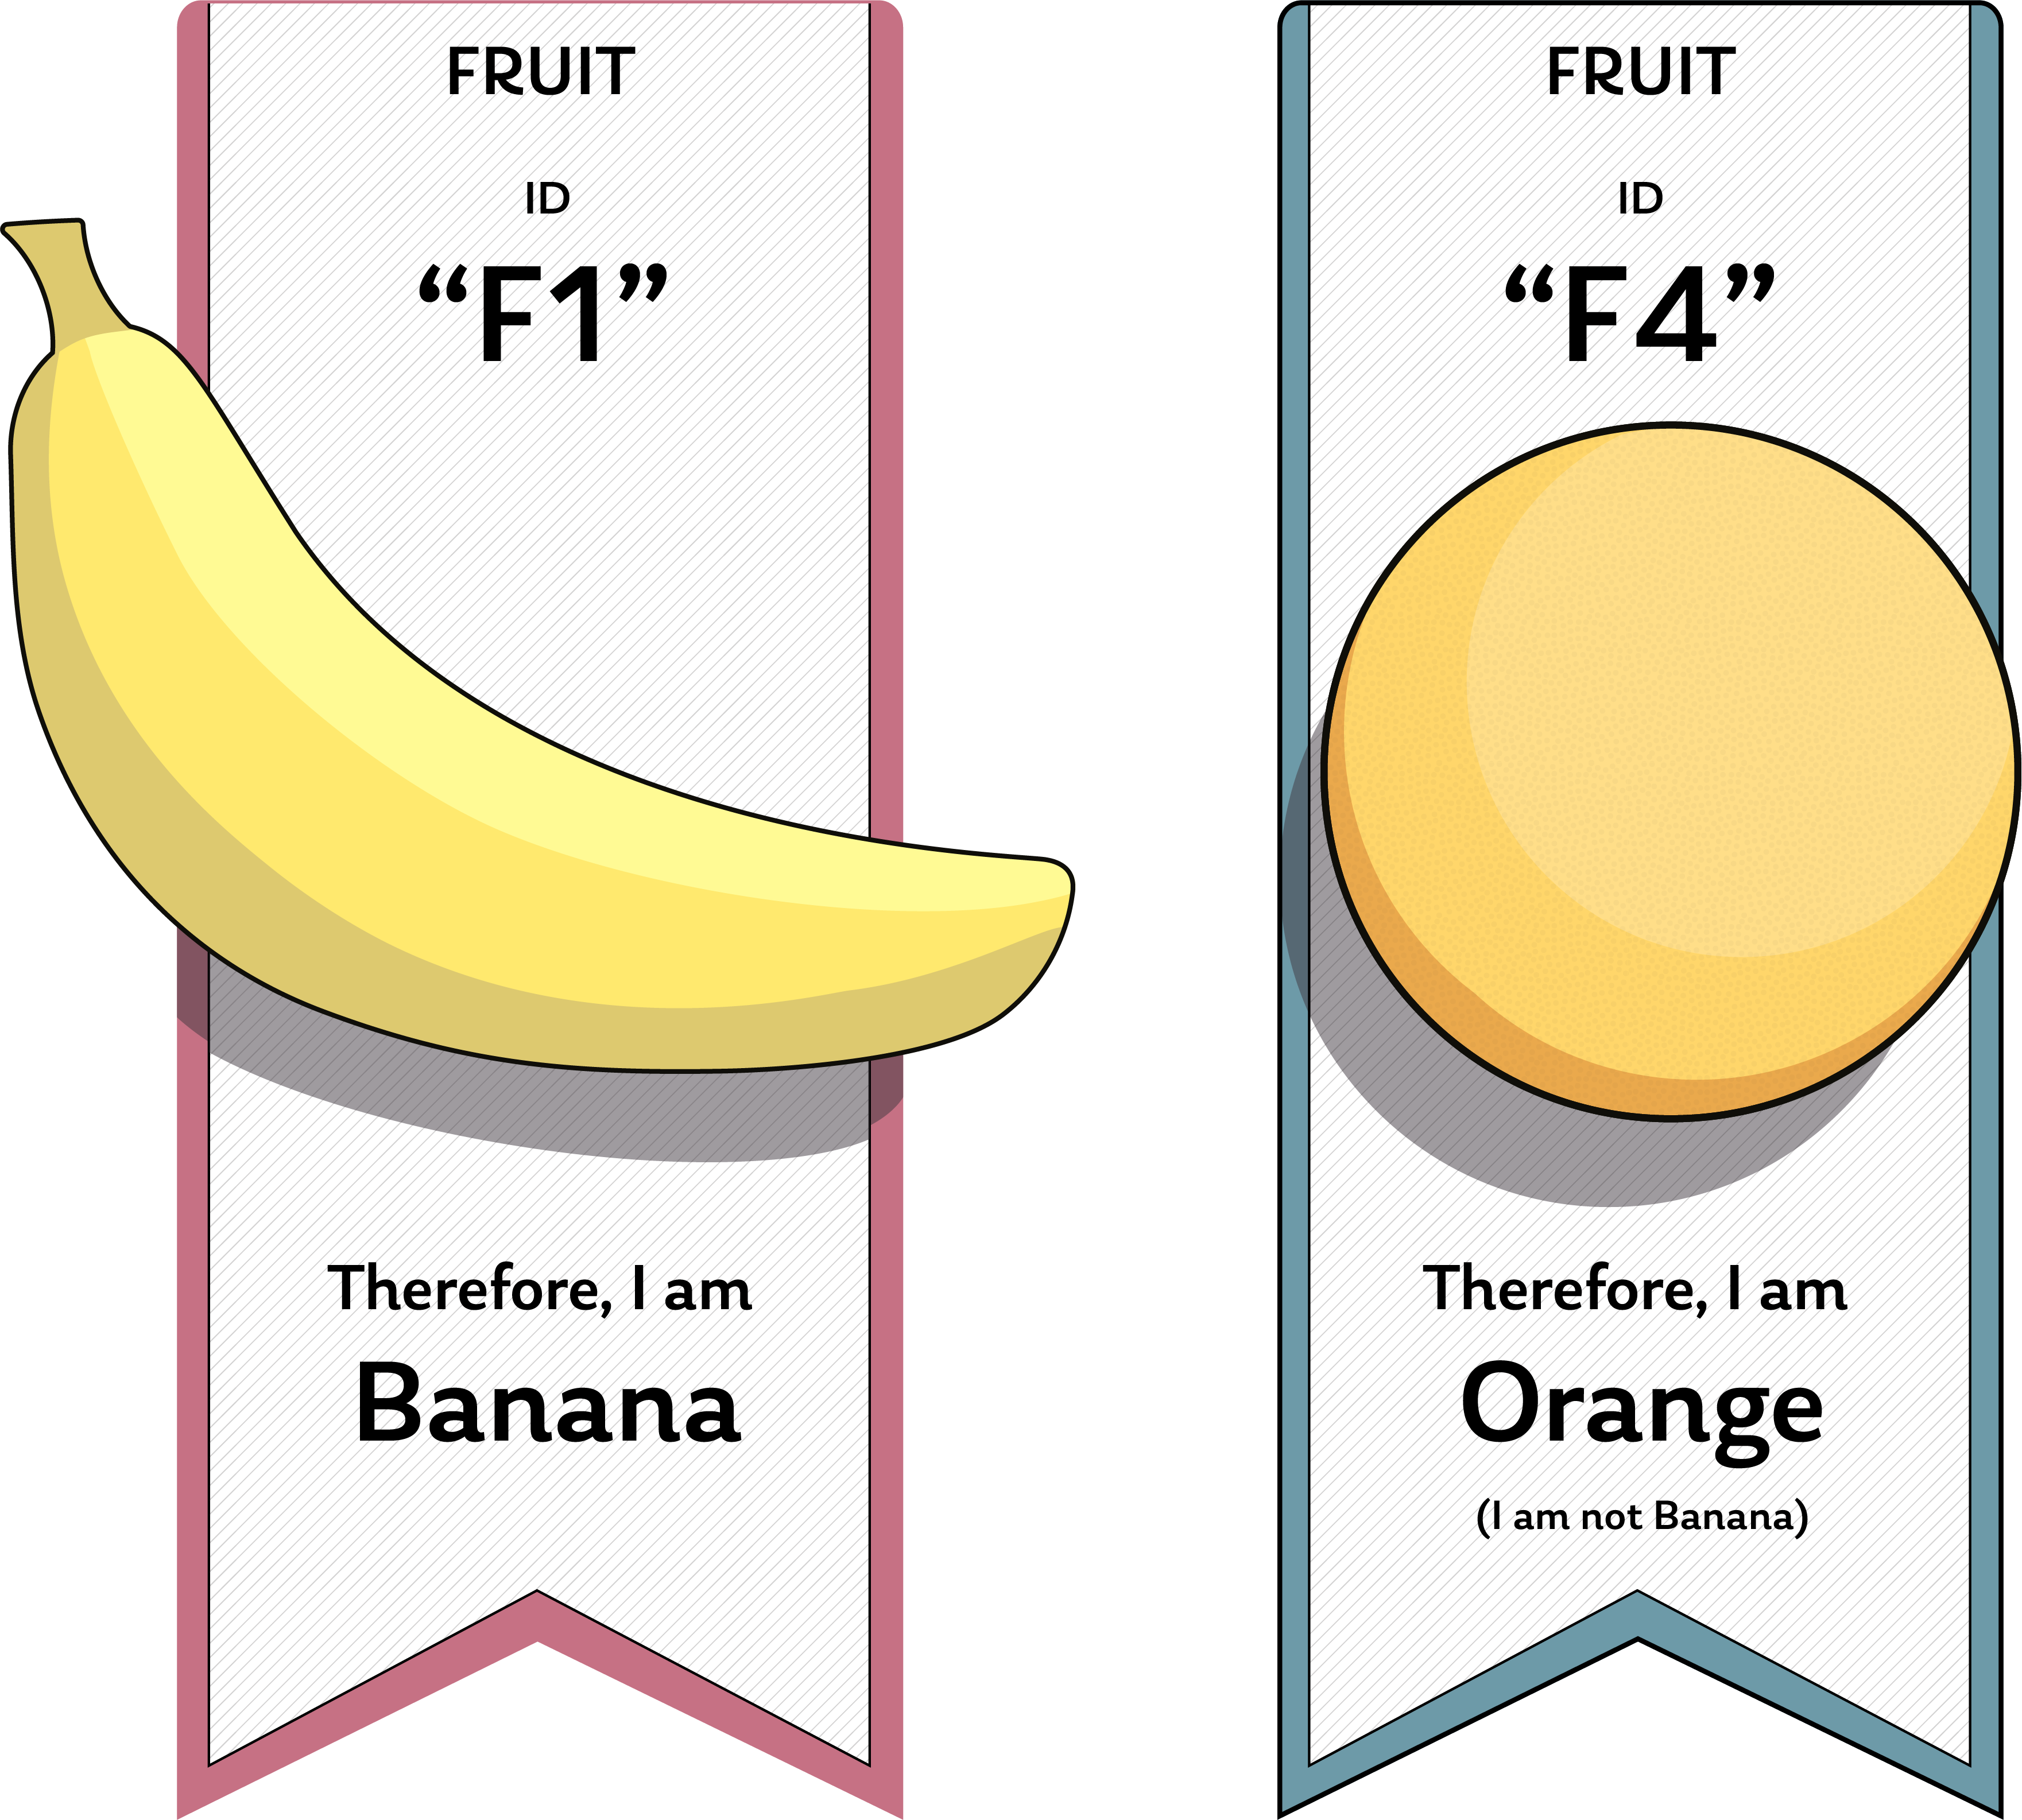 Two Fruit types with different IDs, which let us be sure which one is an banana, and which is an orange.